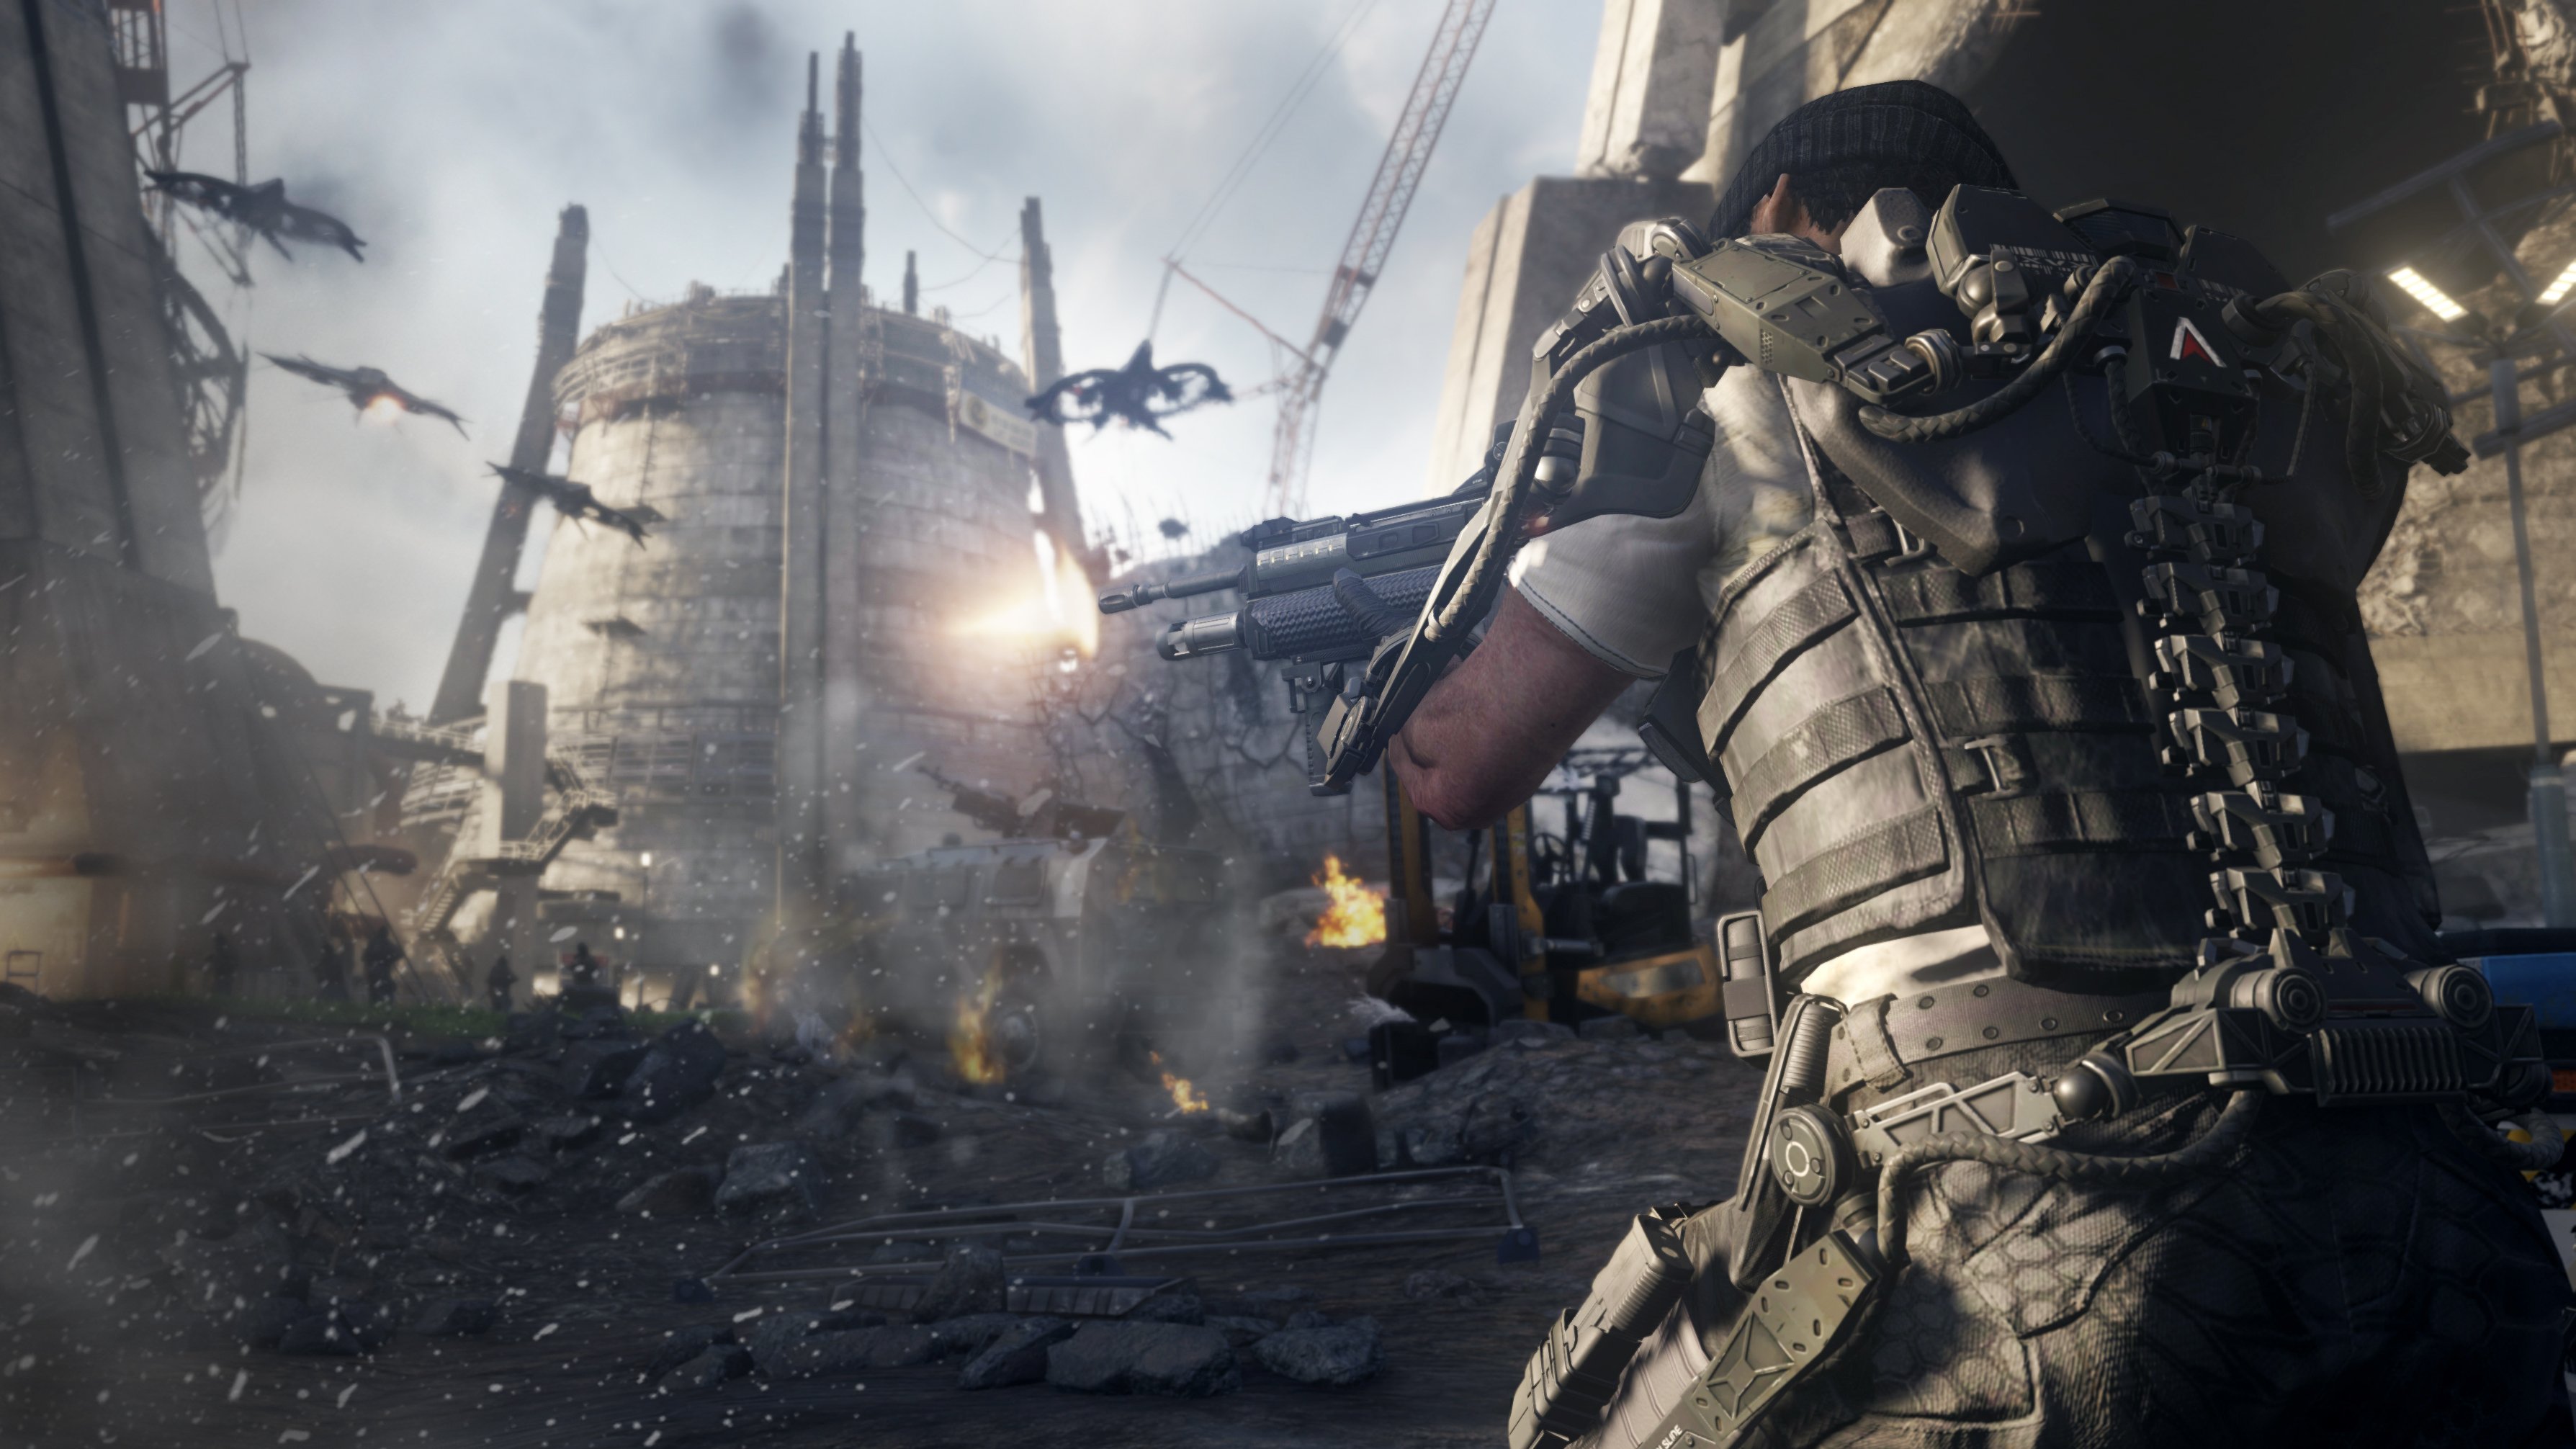 The Call of Duty: Advanced Warfare cast has been revealed (rumour) - Game  News - GameSpace